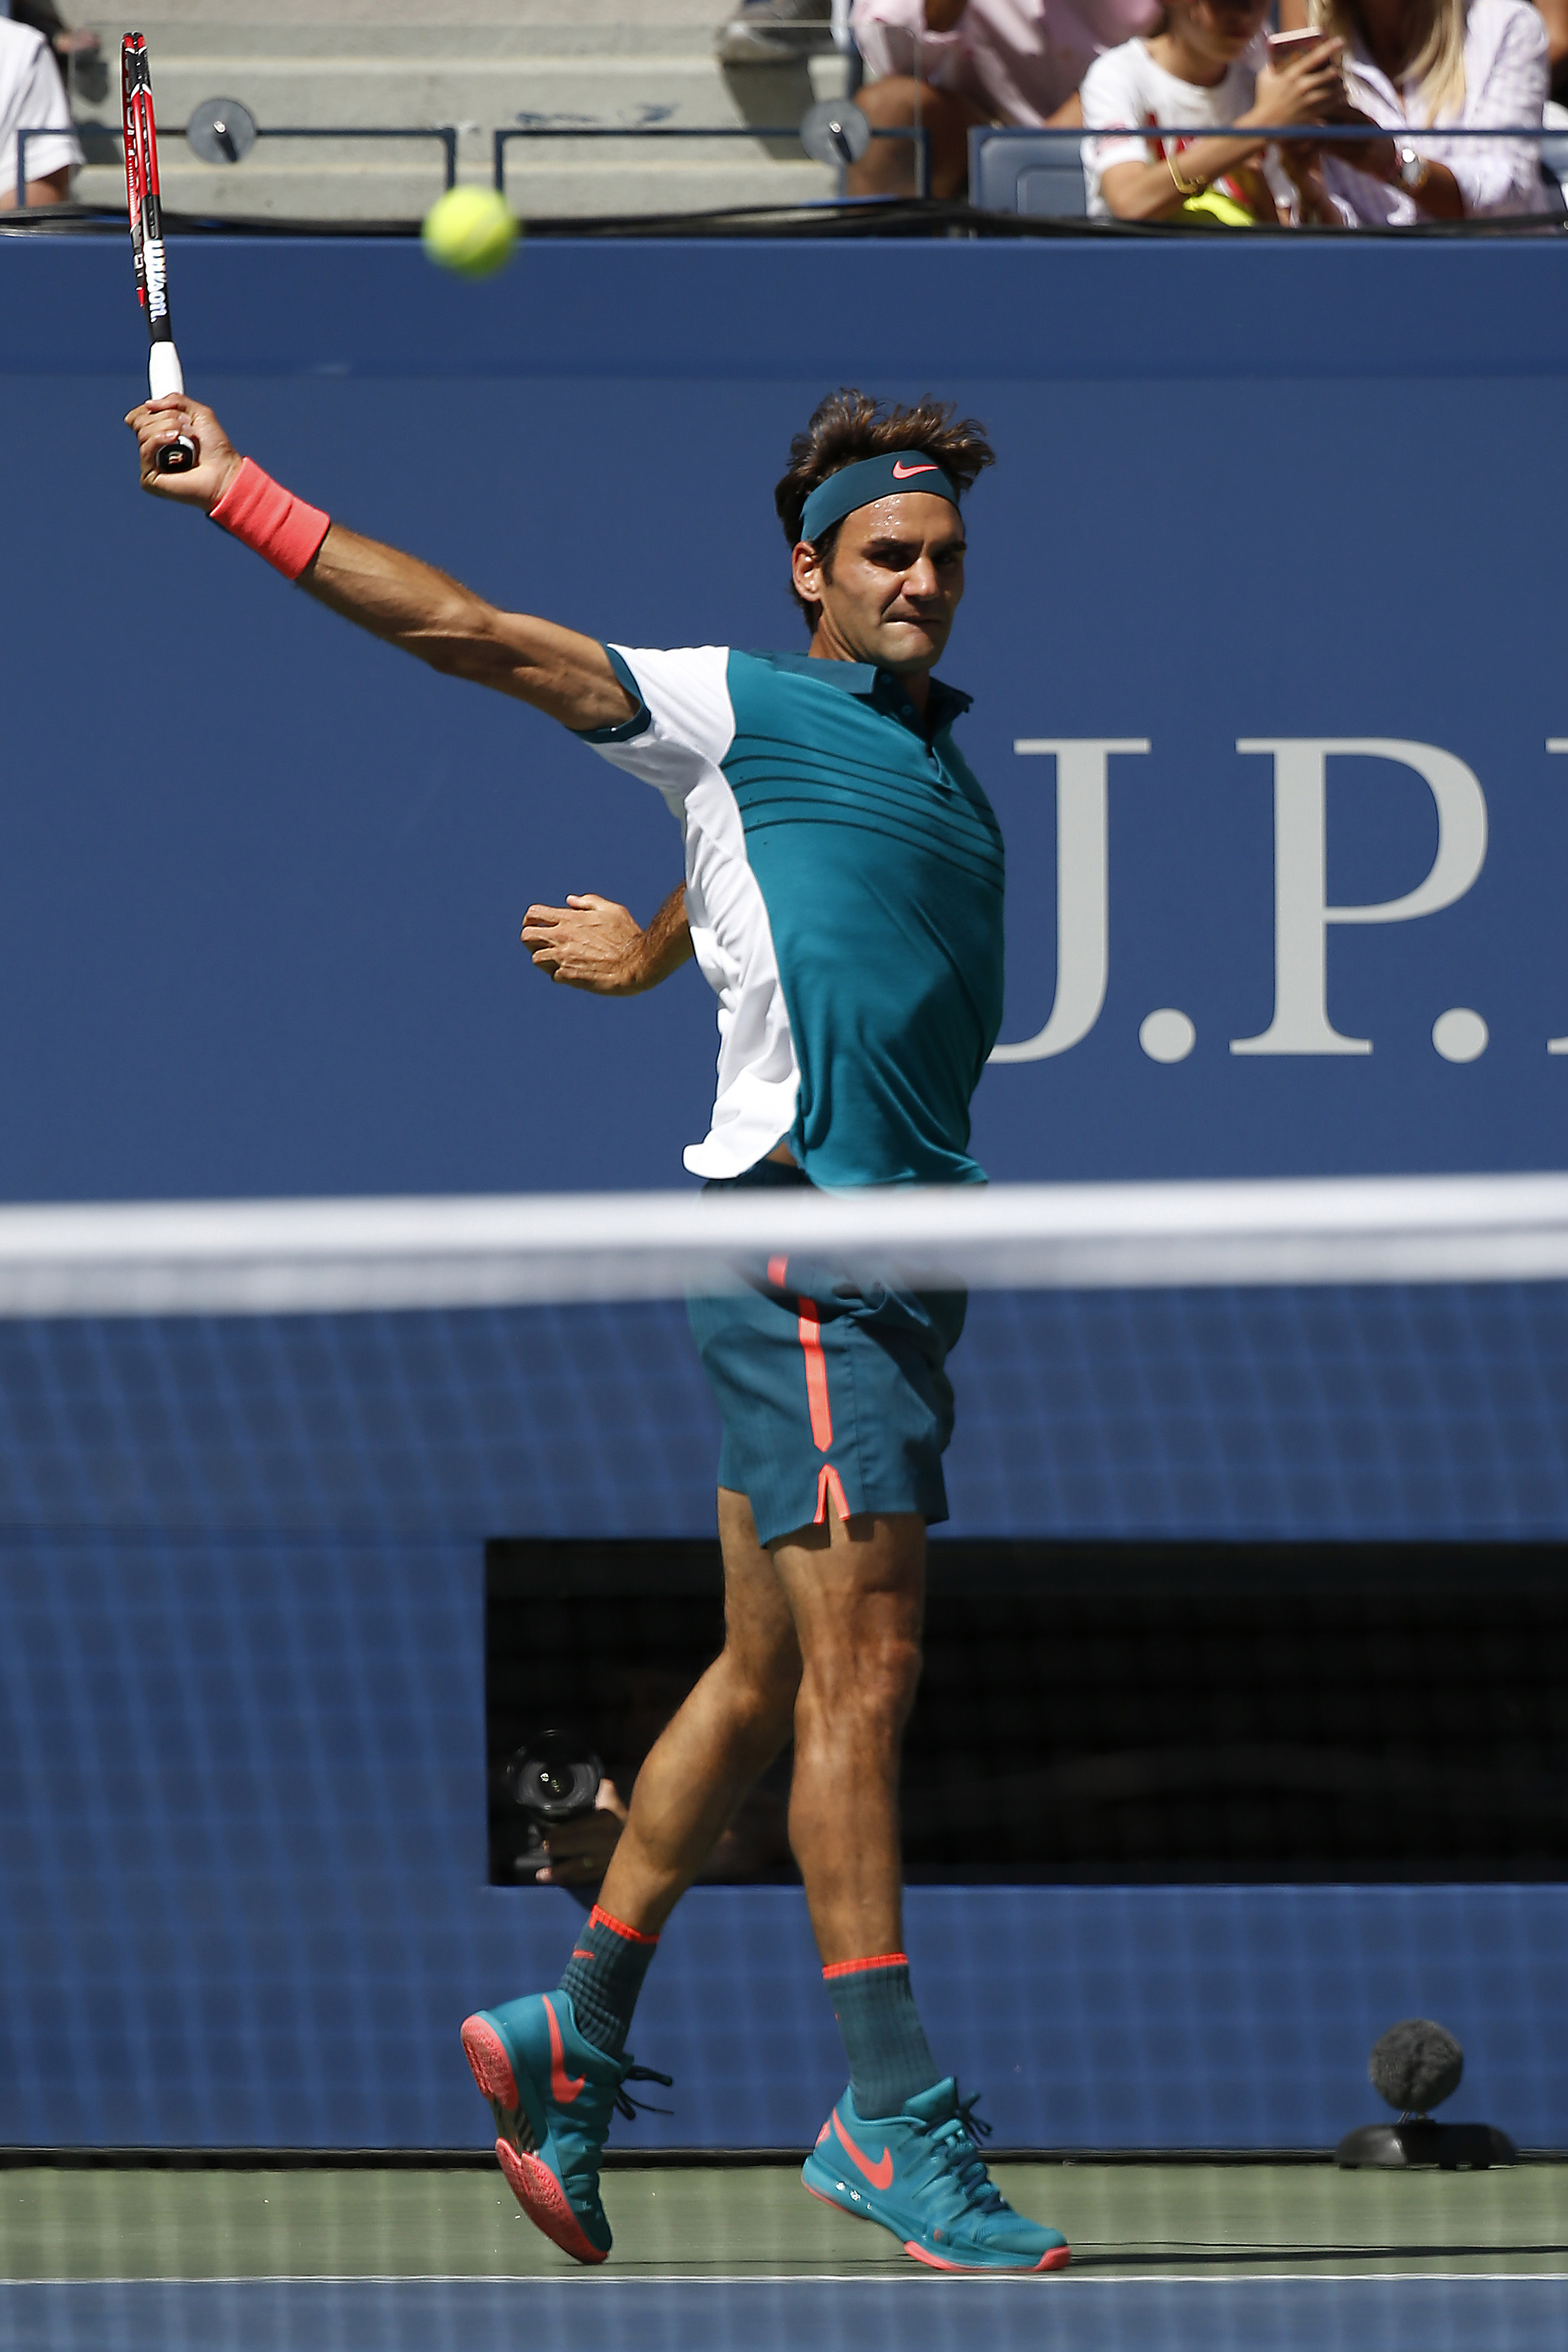 Sep 5, 2015; New York, NY, USA; Roger Federer of Swizterland hits a backhand against Philipp Kohlschreiber of Germany (not pictured) on day six of the 2015 U.S. Open tennis tournament at USTA Billie Jean King National Tennis Center. Mandatory Credit: Geoff Burke-USA TODAY Sports